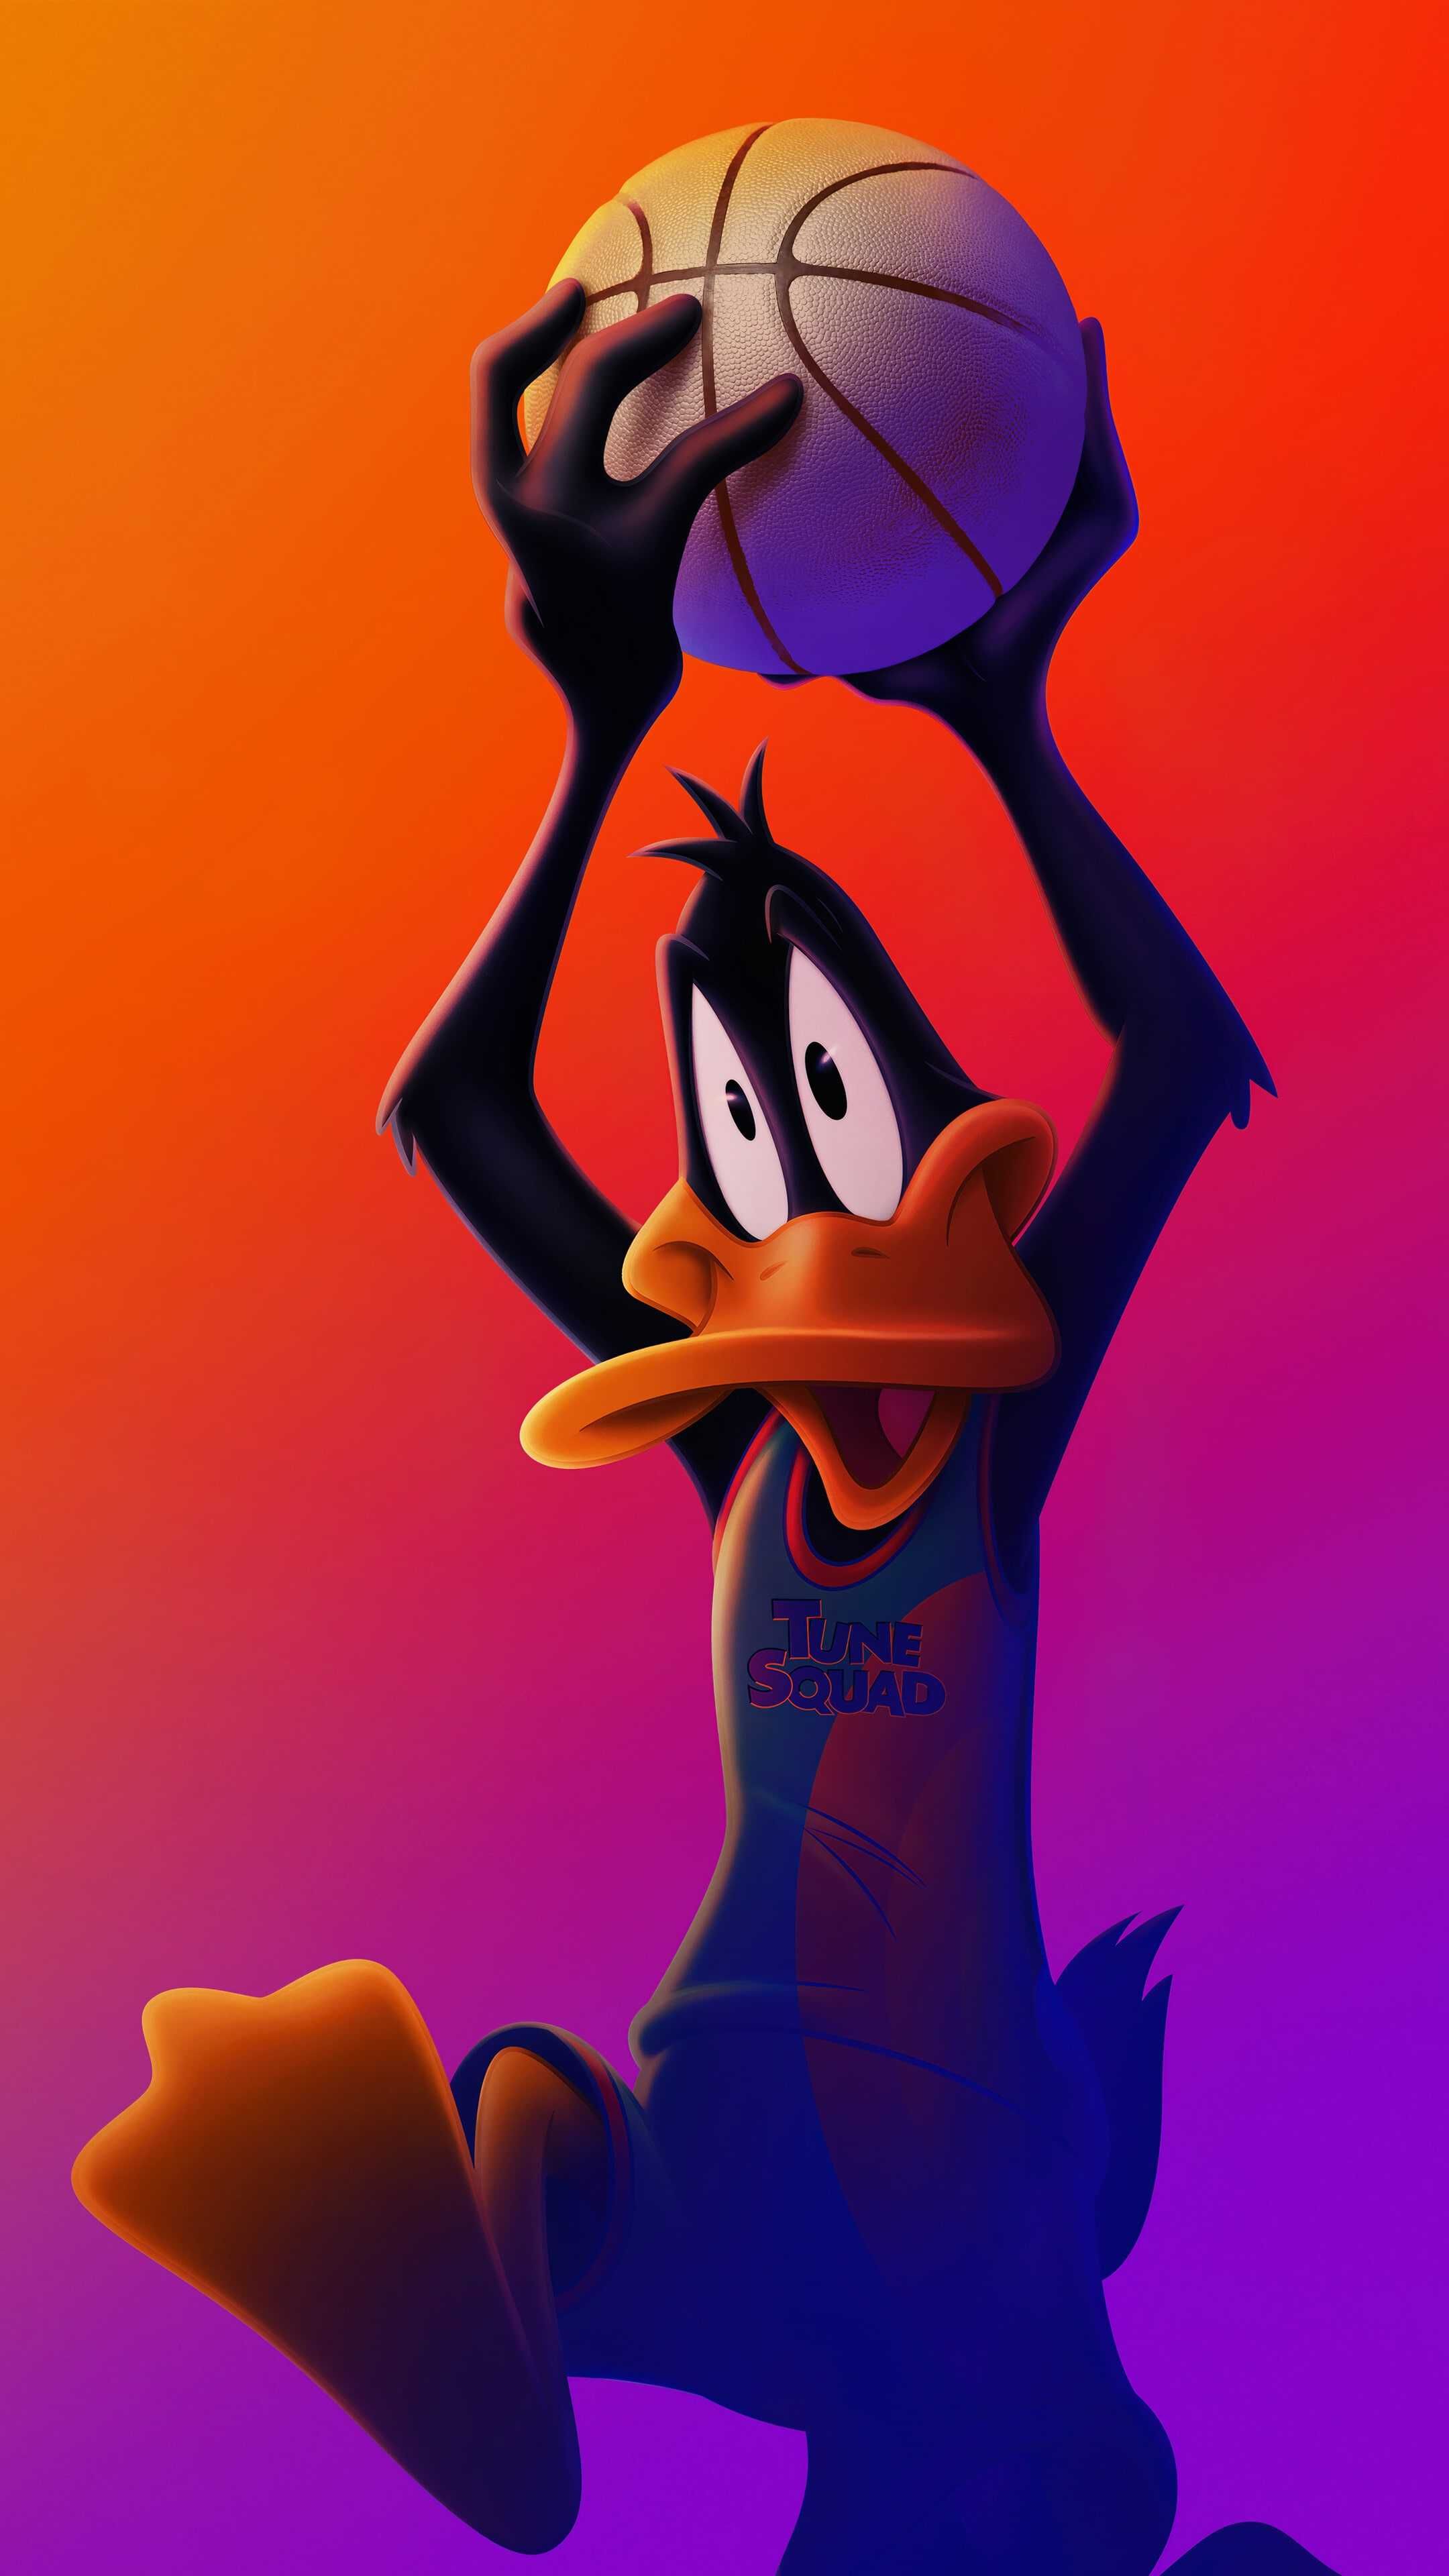 Daffy Duck Space Jam Wallpaper Discover more basketball, Daffy Duck, Film, Movies, Space Jam wallpaper.. Looney tunes wallpaper, Duck wallpaper, Swag cartoon